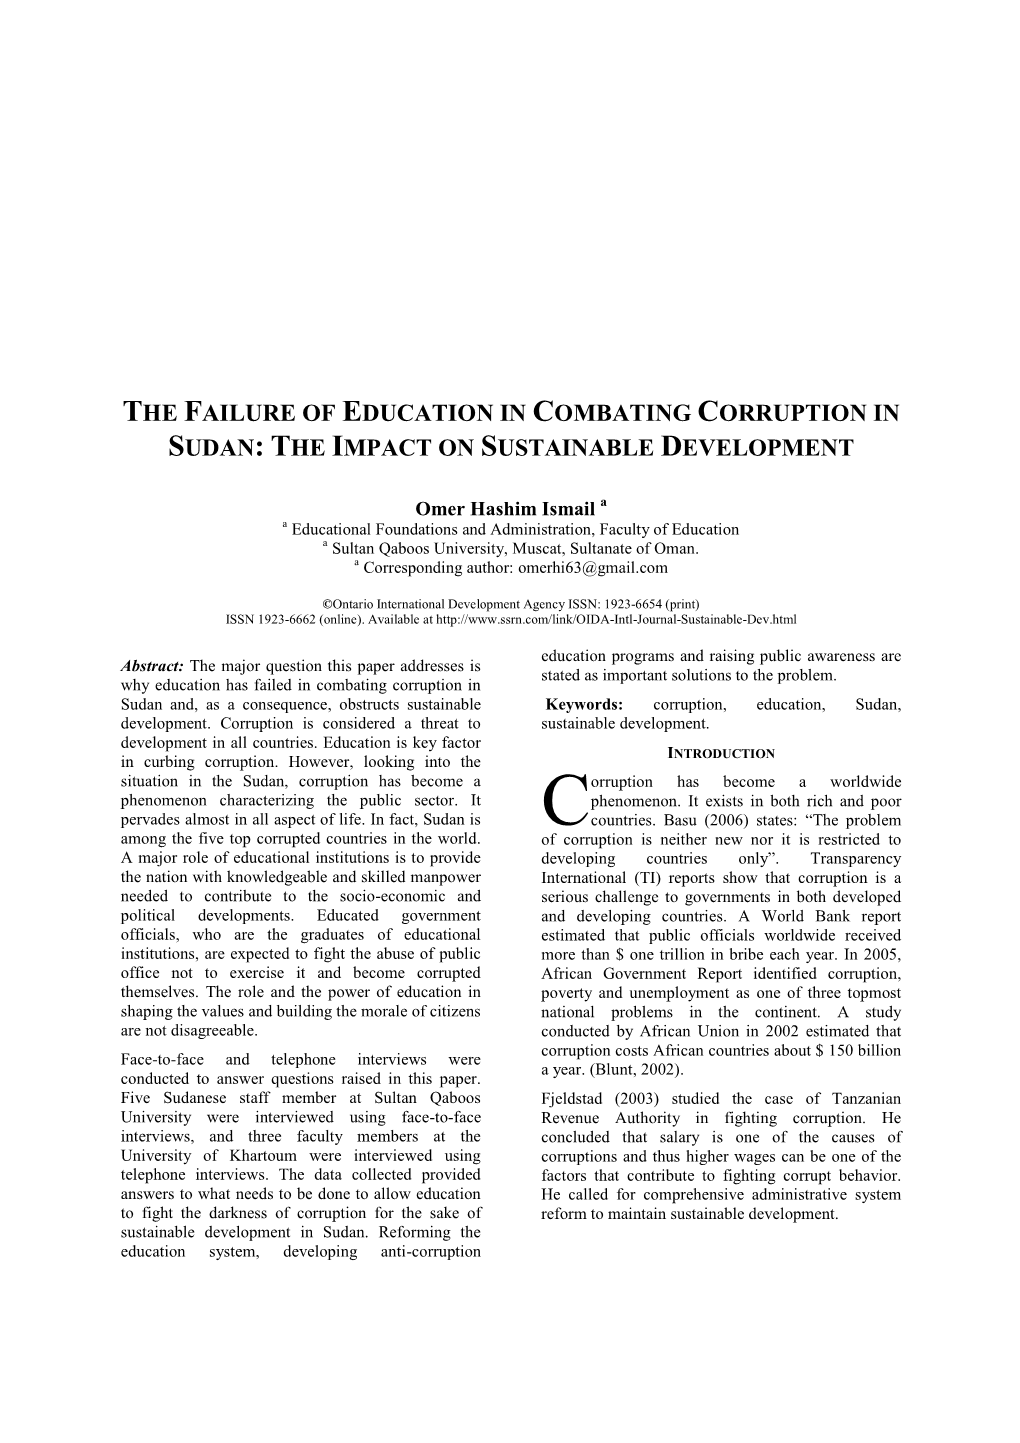 The Failure of Education in Combating Corruption in Sudan: the Impact on Sustainable Development